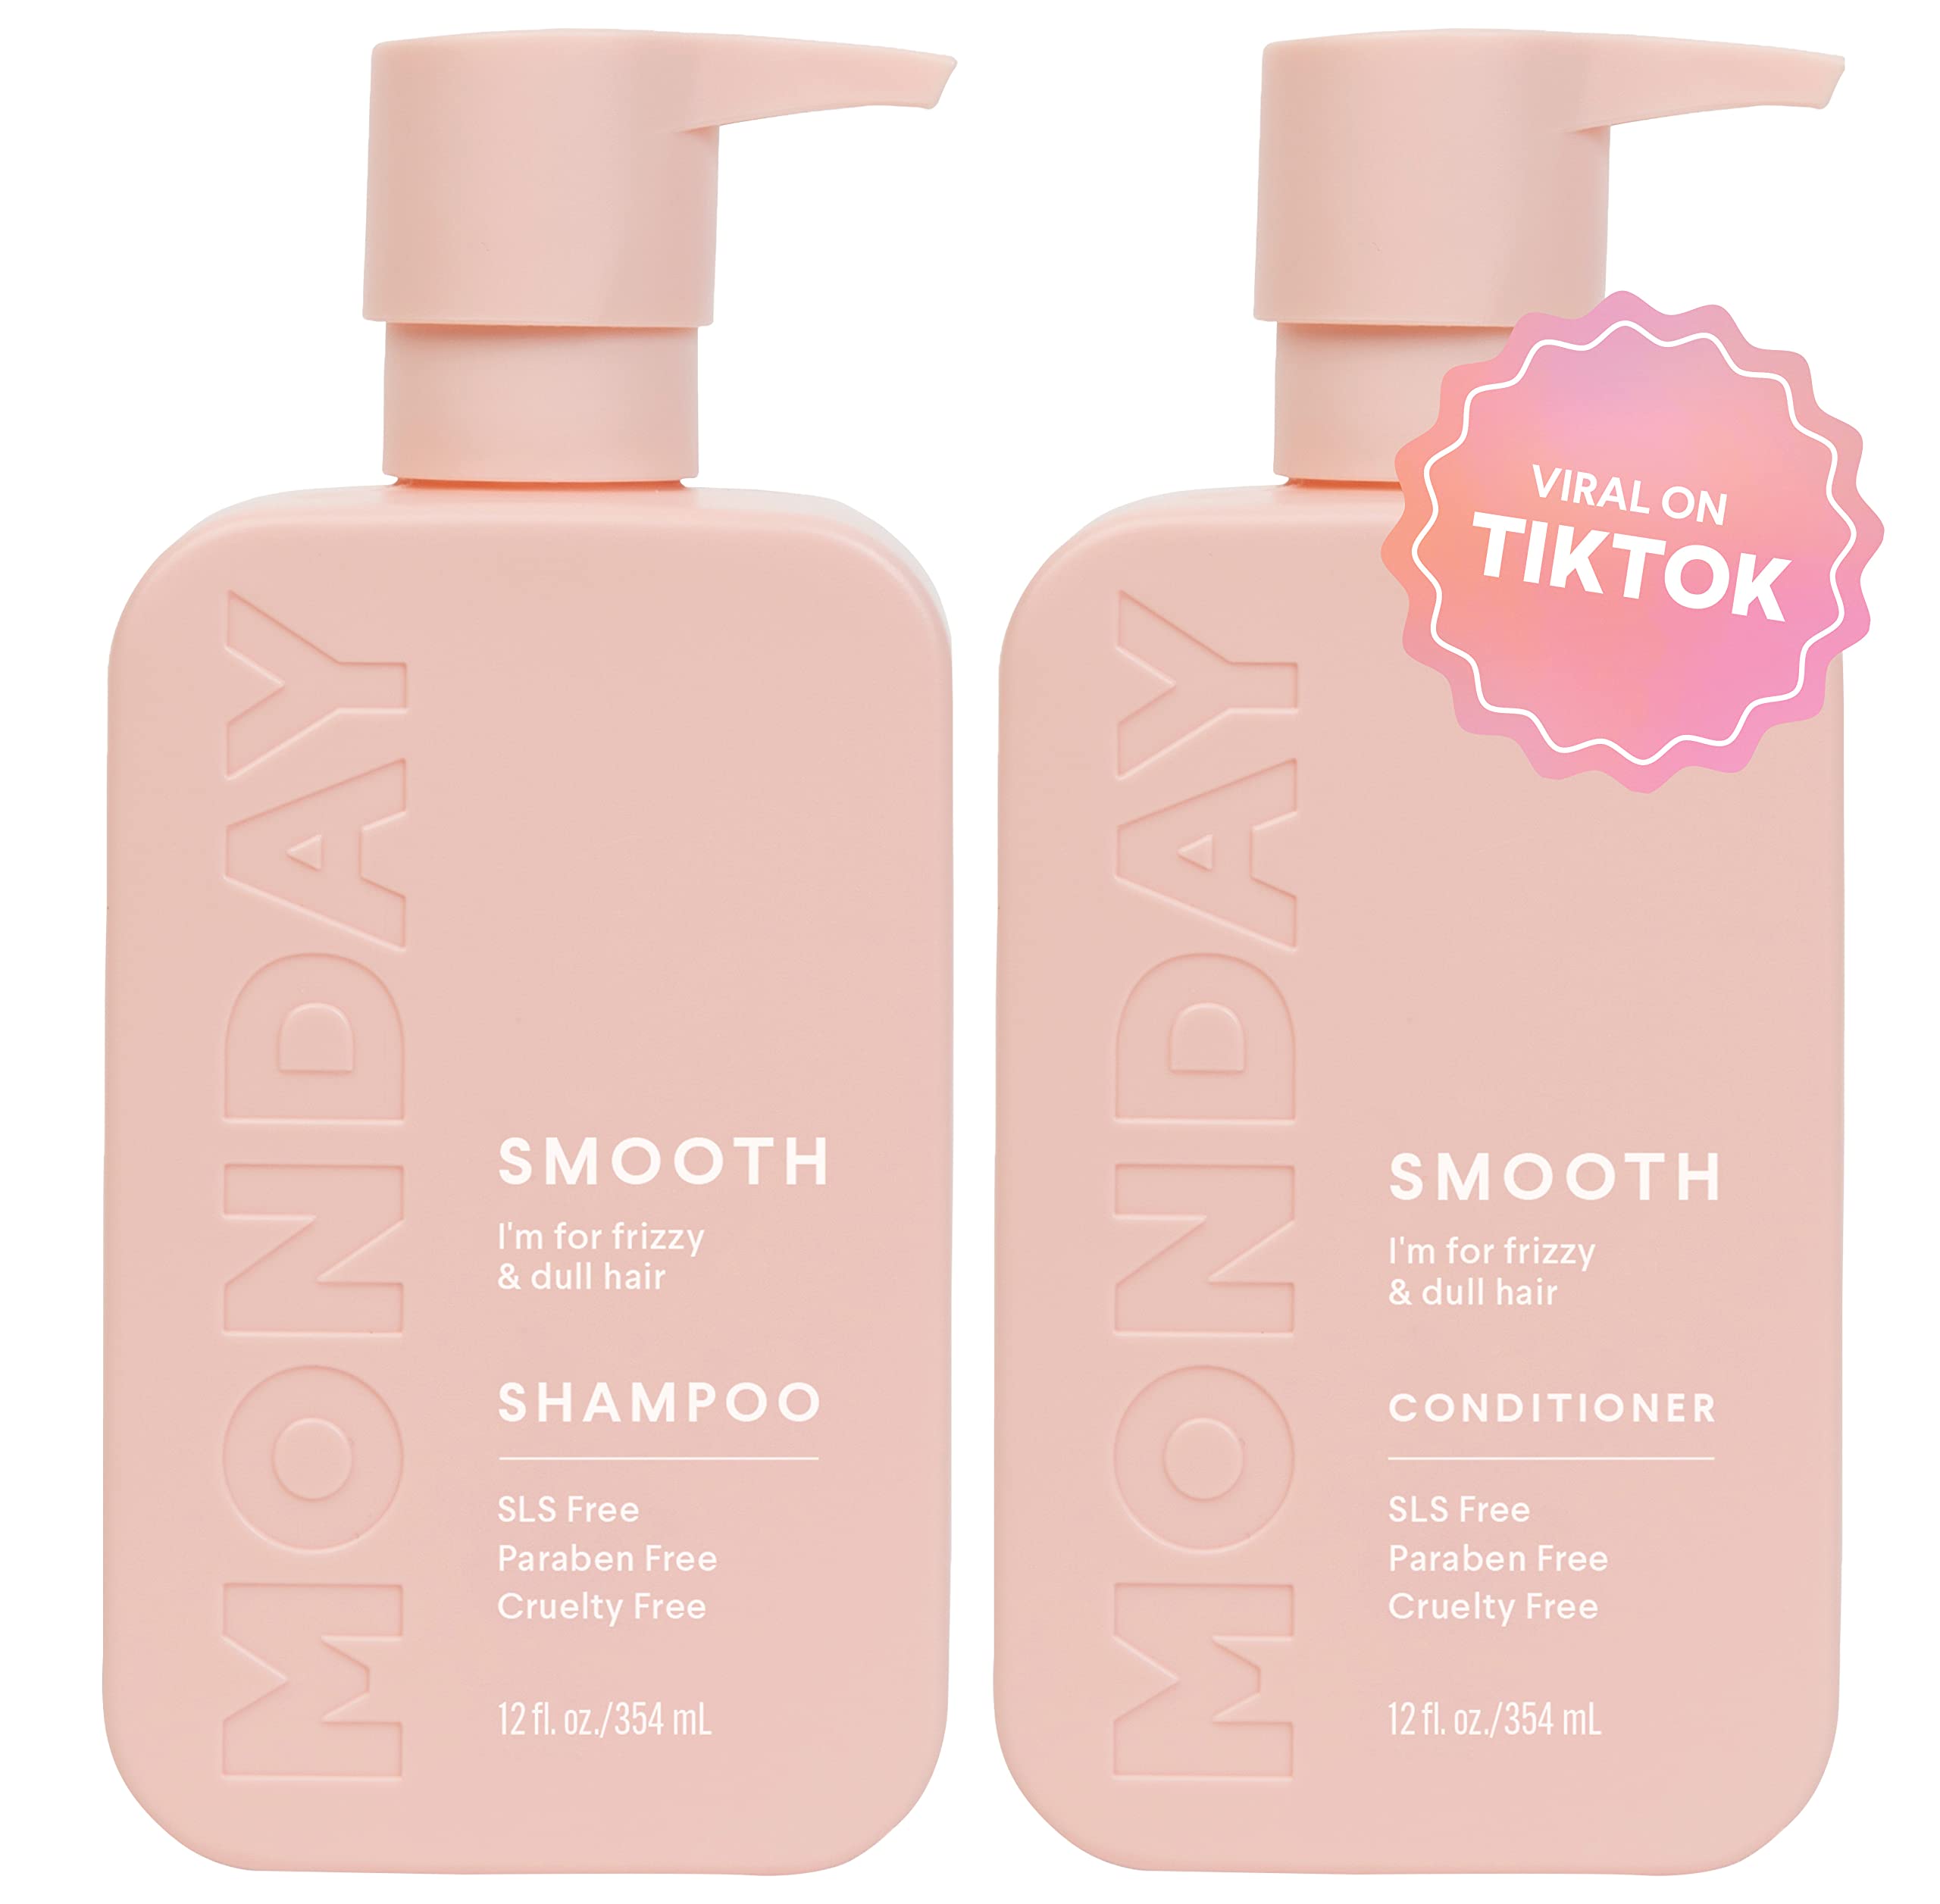 MONDAY HAIRCARE Smooth Shampoo + Conditioner Bathroom Set (2 Pack) 12oz Each for Frizzy, Coarse, and Curly Hair, Made from Coconut Oil, Shea Butter, & Vitamin E, 100% Recyclable Bottles